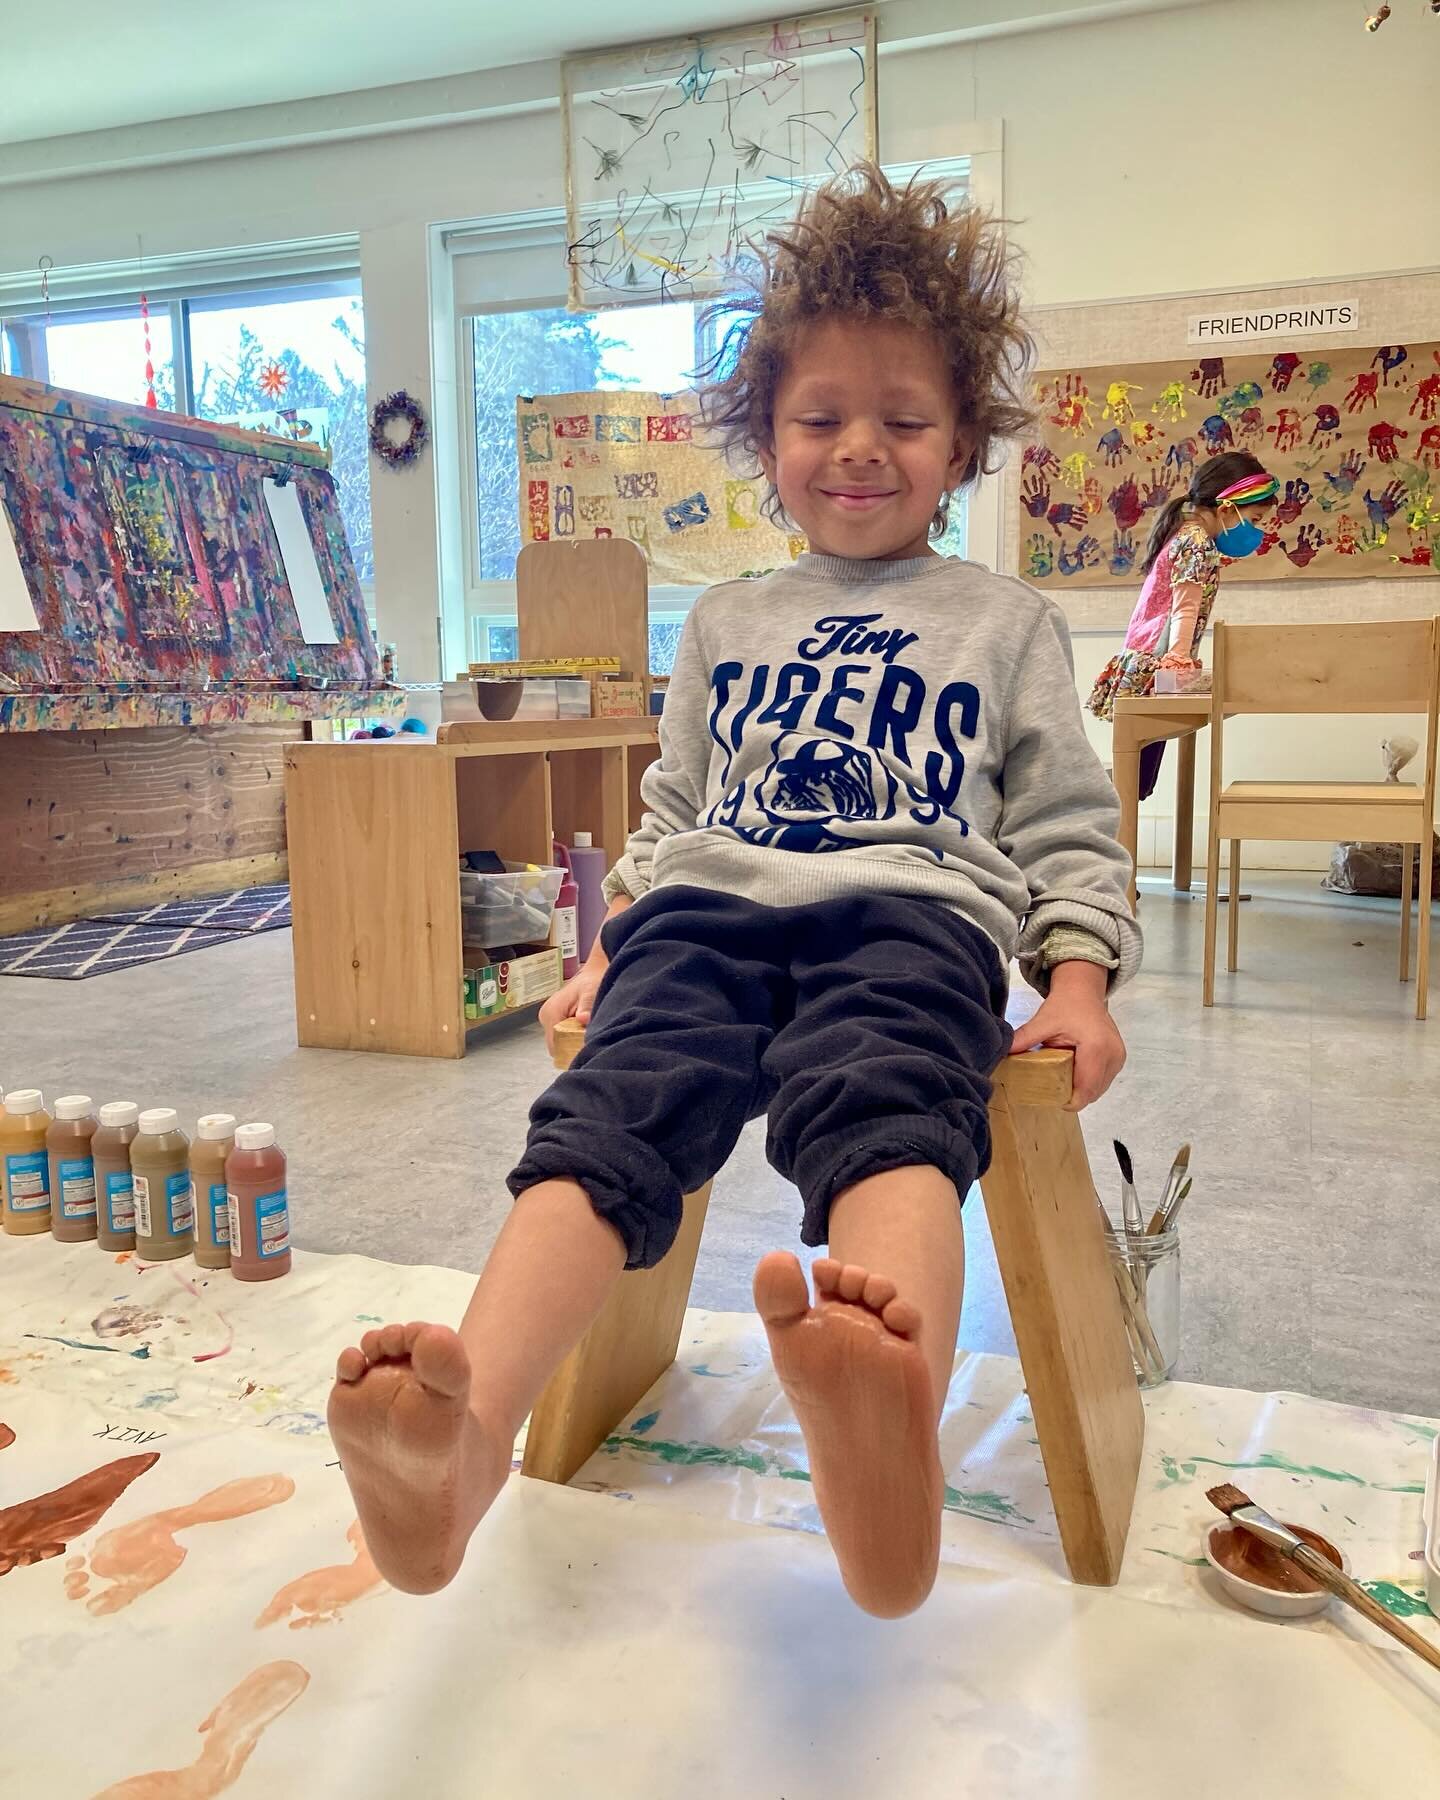 This week Nursery teachers wove together inquiries about animal tracks and skin color. Children found the shade of brown that matched their skin and then teachers painted their feet so they could make their own tracks! #preschool #commonschool #emerg